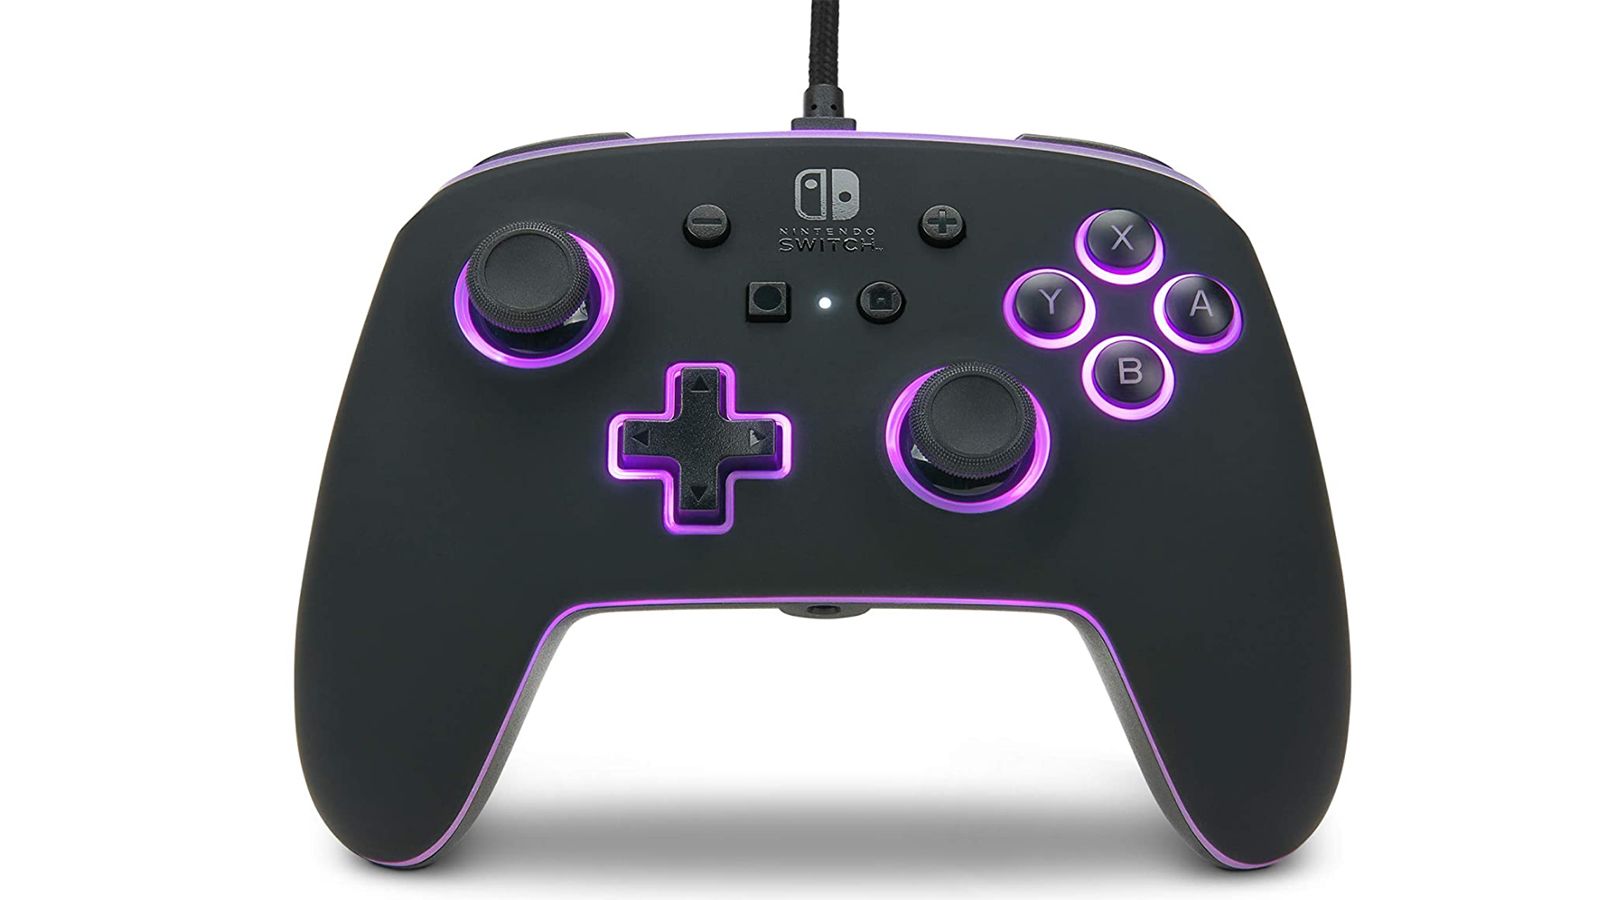 PowerA GameCube Style Wired Controller for Nintendo Switch, Nintendo Switch  Wired controllers. Officially licensed.